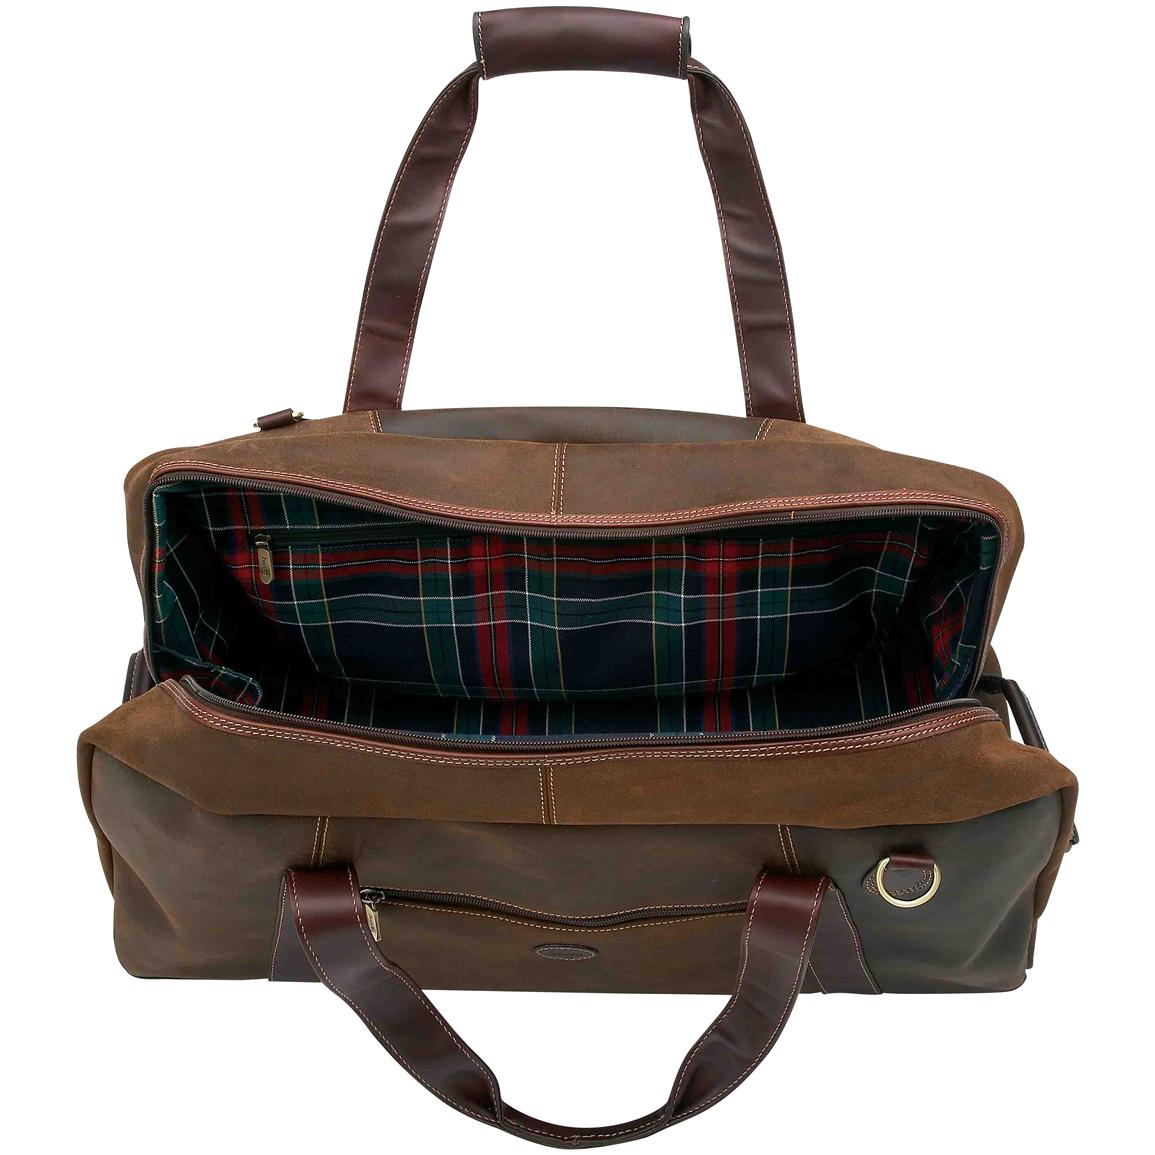 Leather Duffle Bag Clearance | Confederated Tribes of the Umatilla Indian Reservation